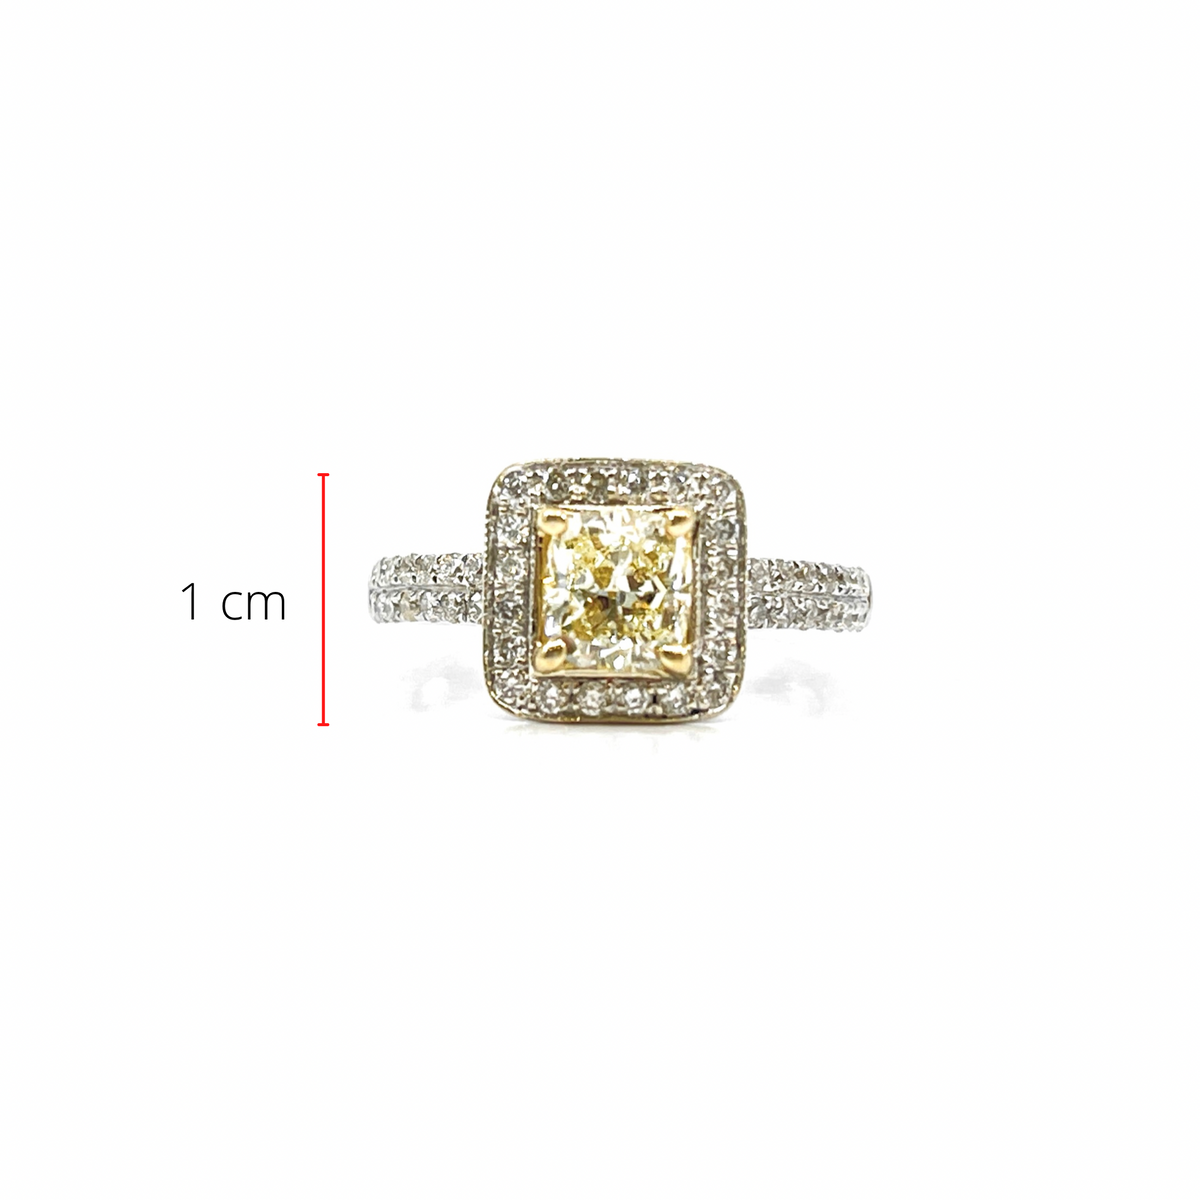 14K White Gold 1.60cttw Fancy Yellow and White Diamond Halo Engagement Ring, size 6